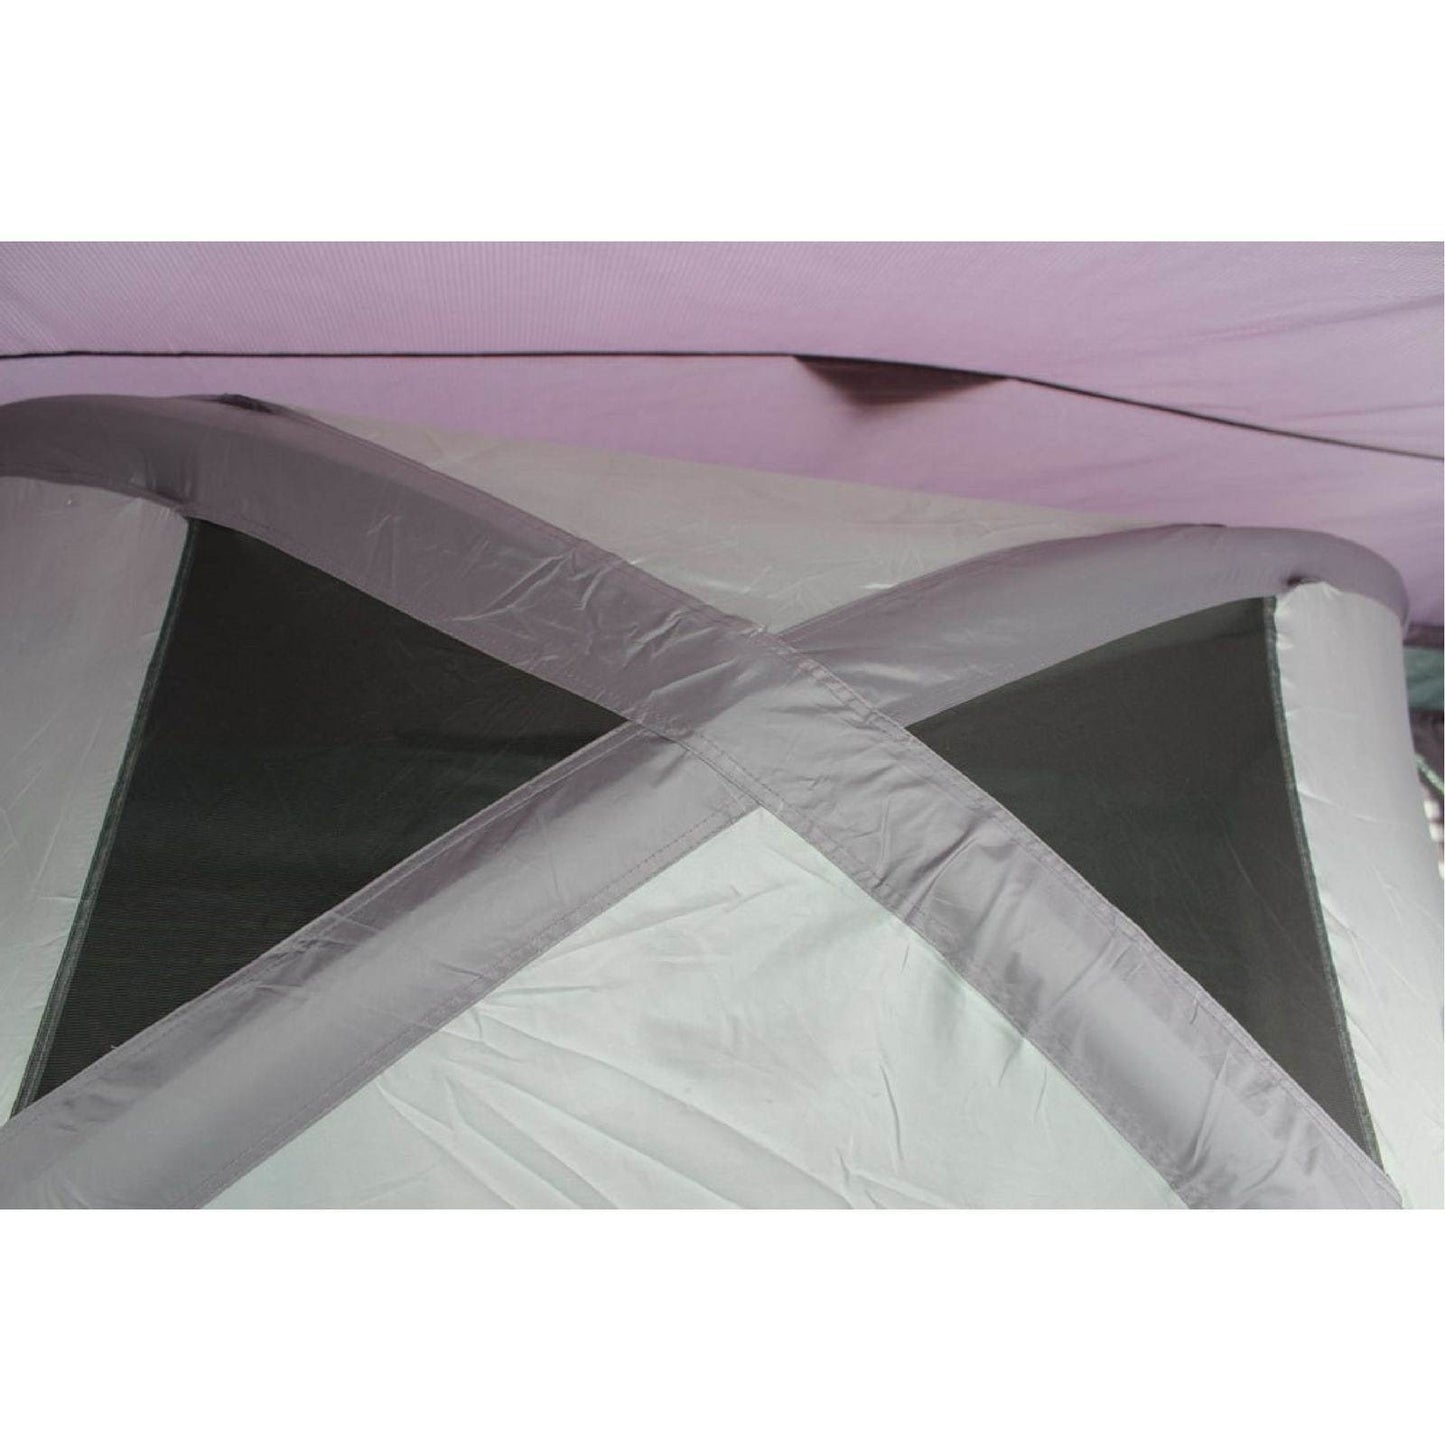 Outdoor Revolution Air Pod Inflatable Inner Tent OR18905 (2018) made by Outdoor Revolution. A Innertent sold by Quality Caravan Awnings